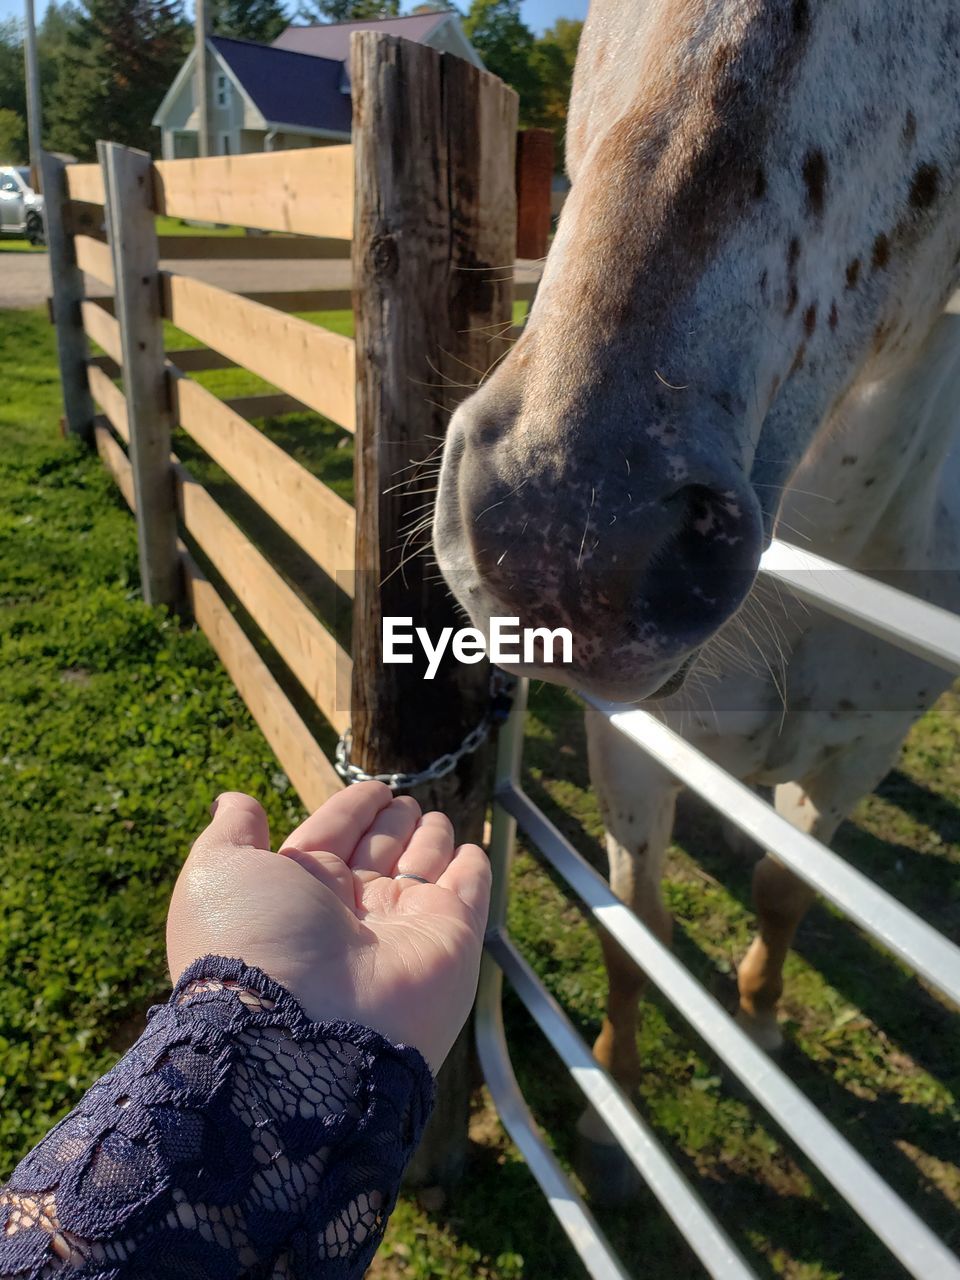 MIDSECTION OF PERSON WITH HORSE IN MOUTH